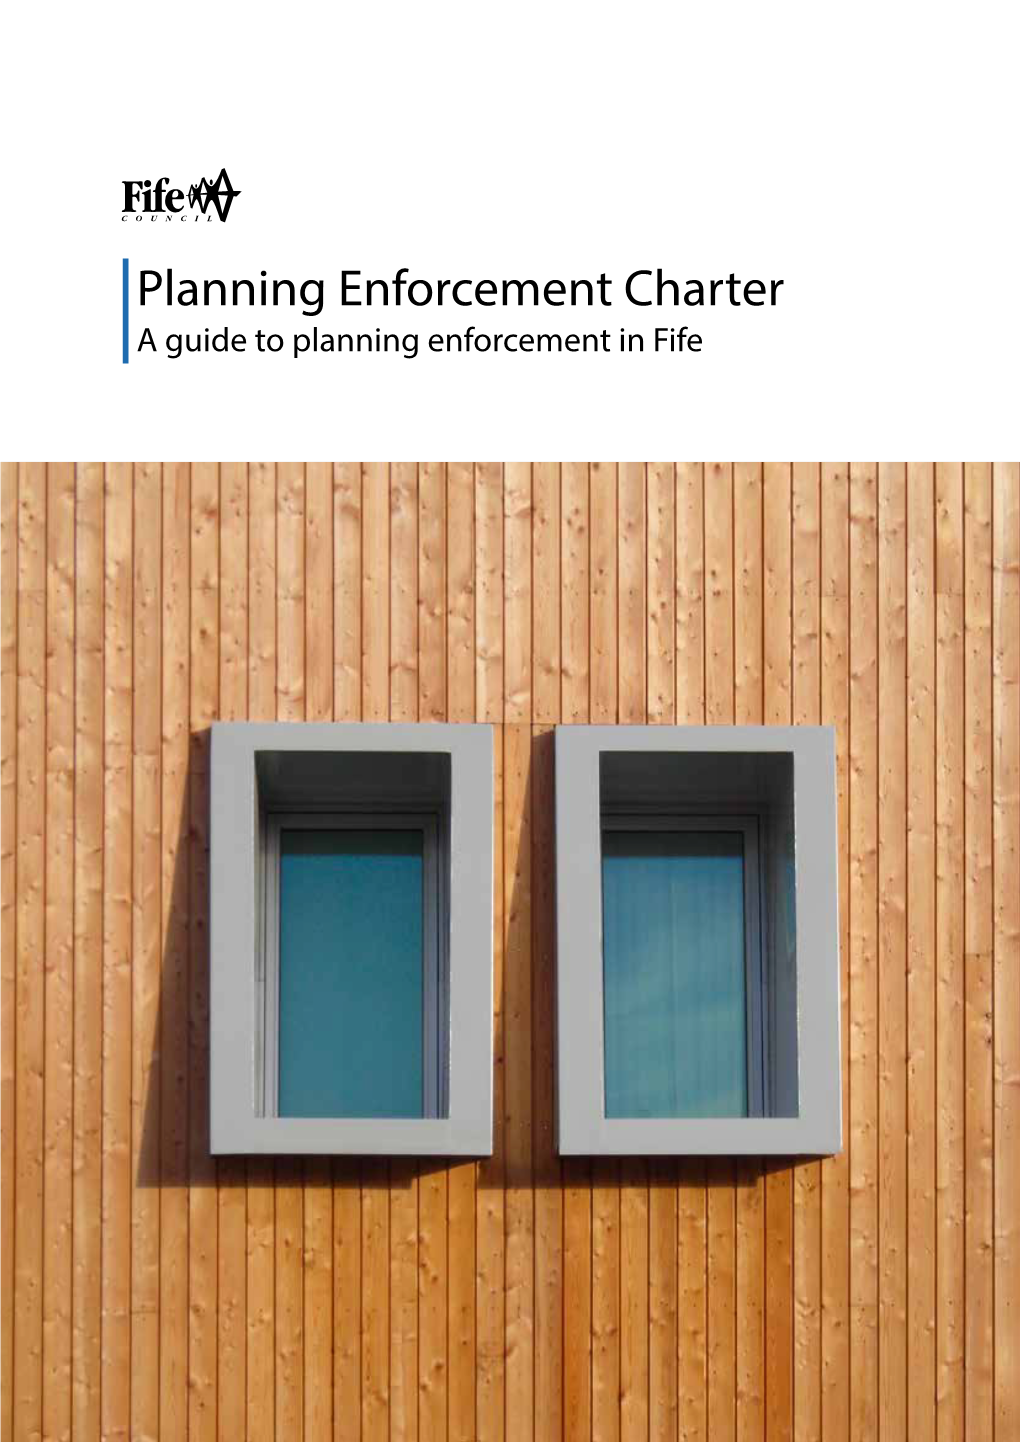 Planning Enforcement Charter a Guide to Planning Enforcement in Fife